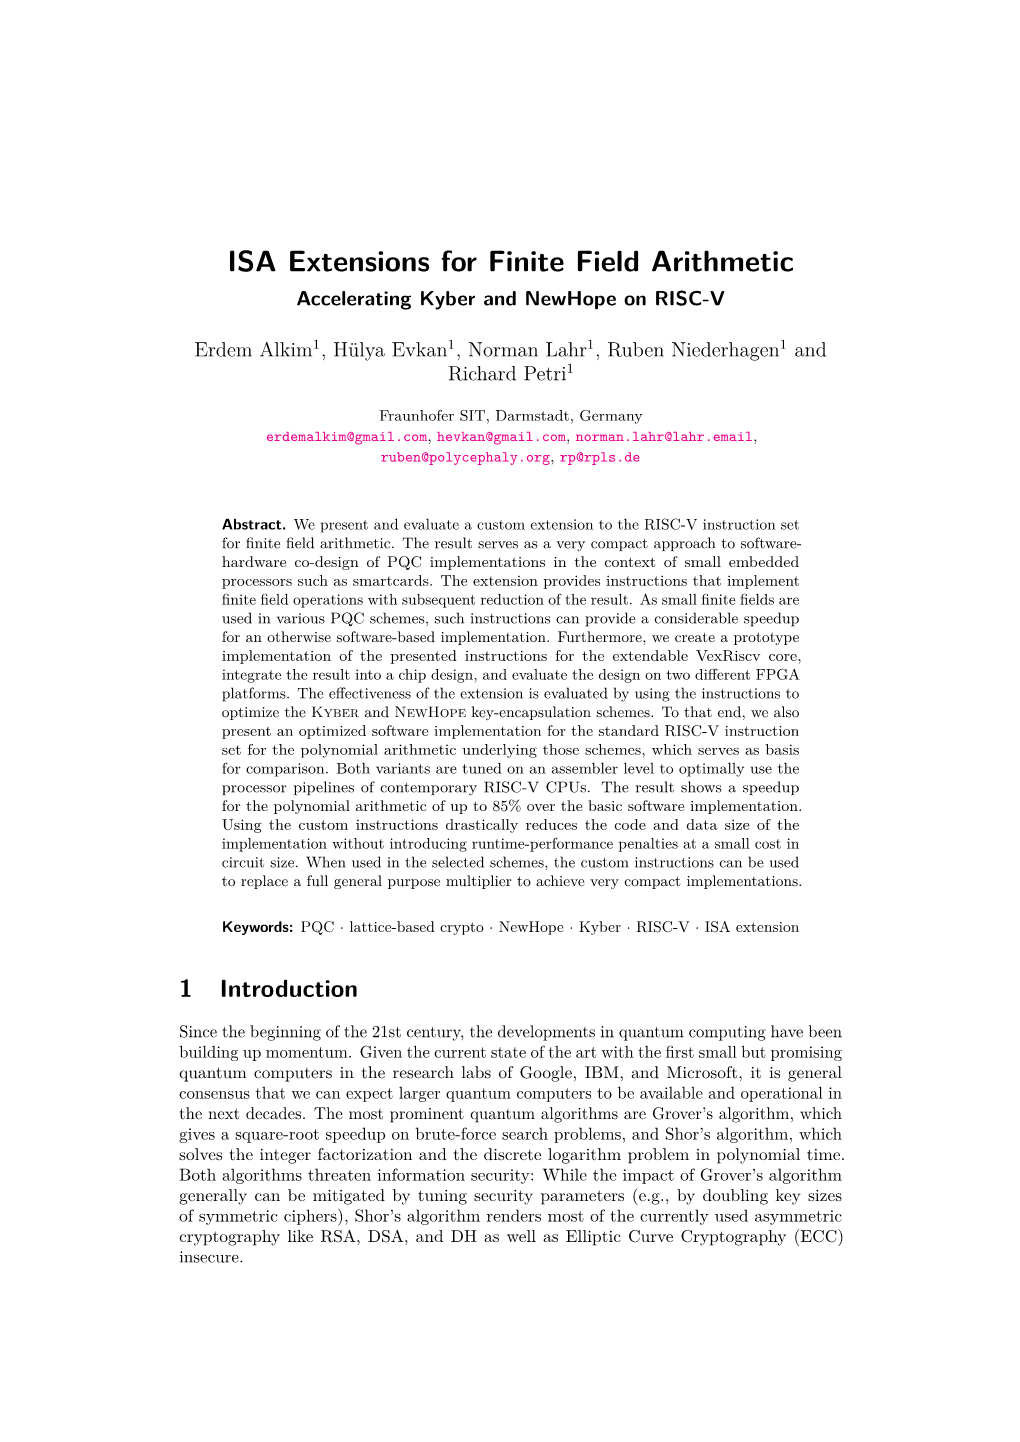 ISA Extensions for Finite Field Arithmetic Accelerating Kyber and Newhope on RISC-V